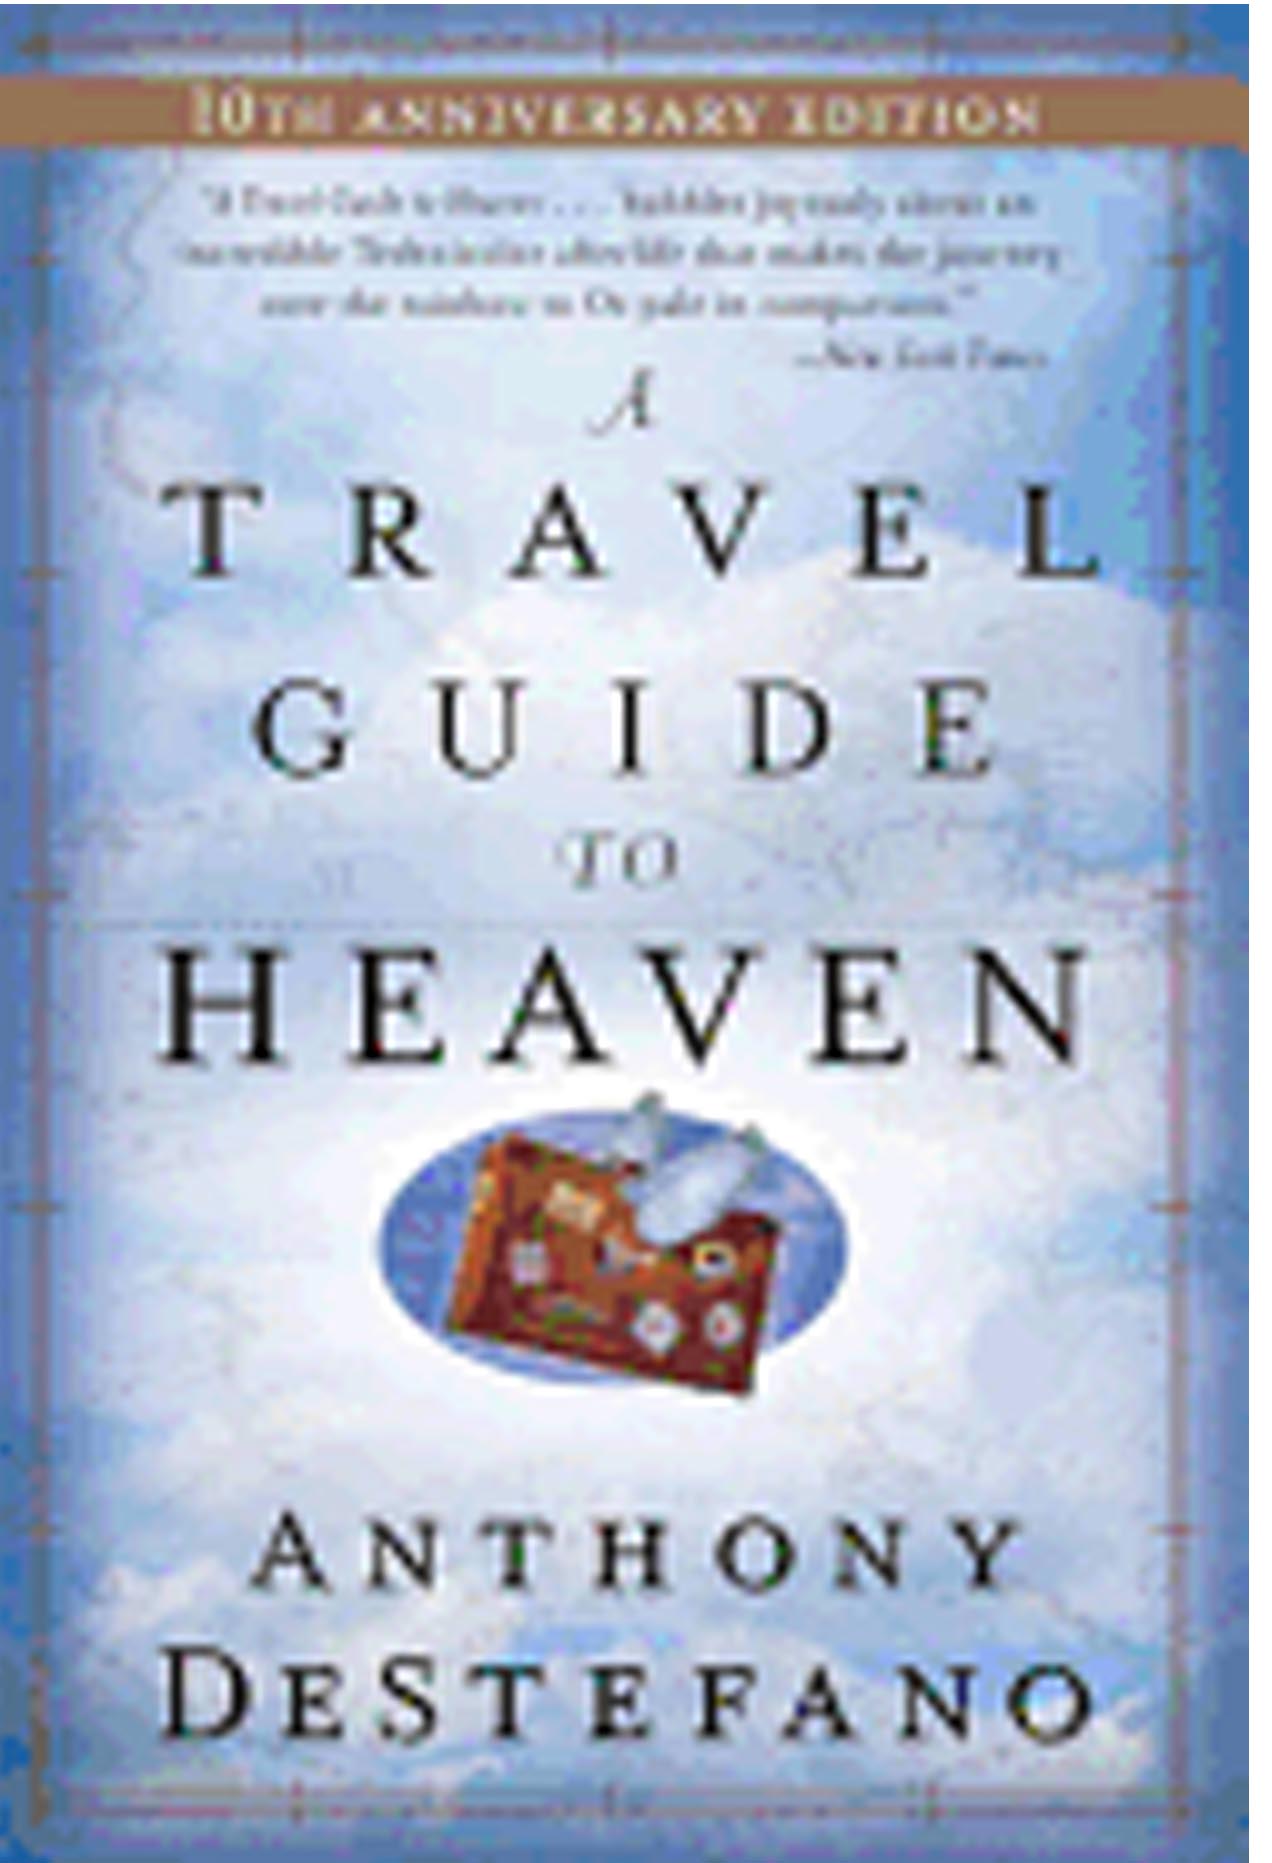 A Travel Guide To Heaven by Anthony DeStefano 108-9780385509893